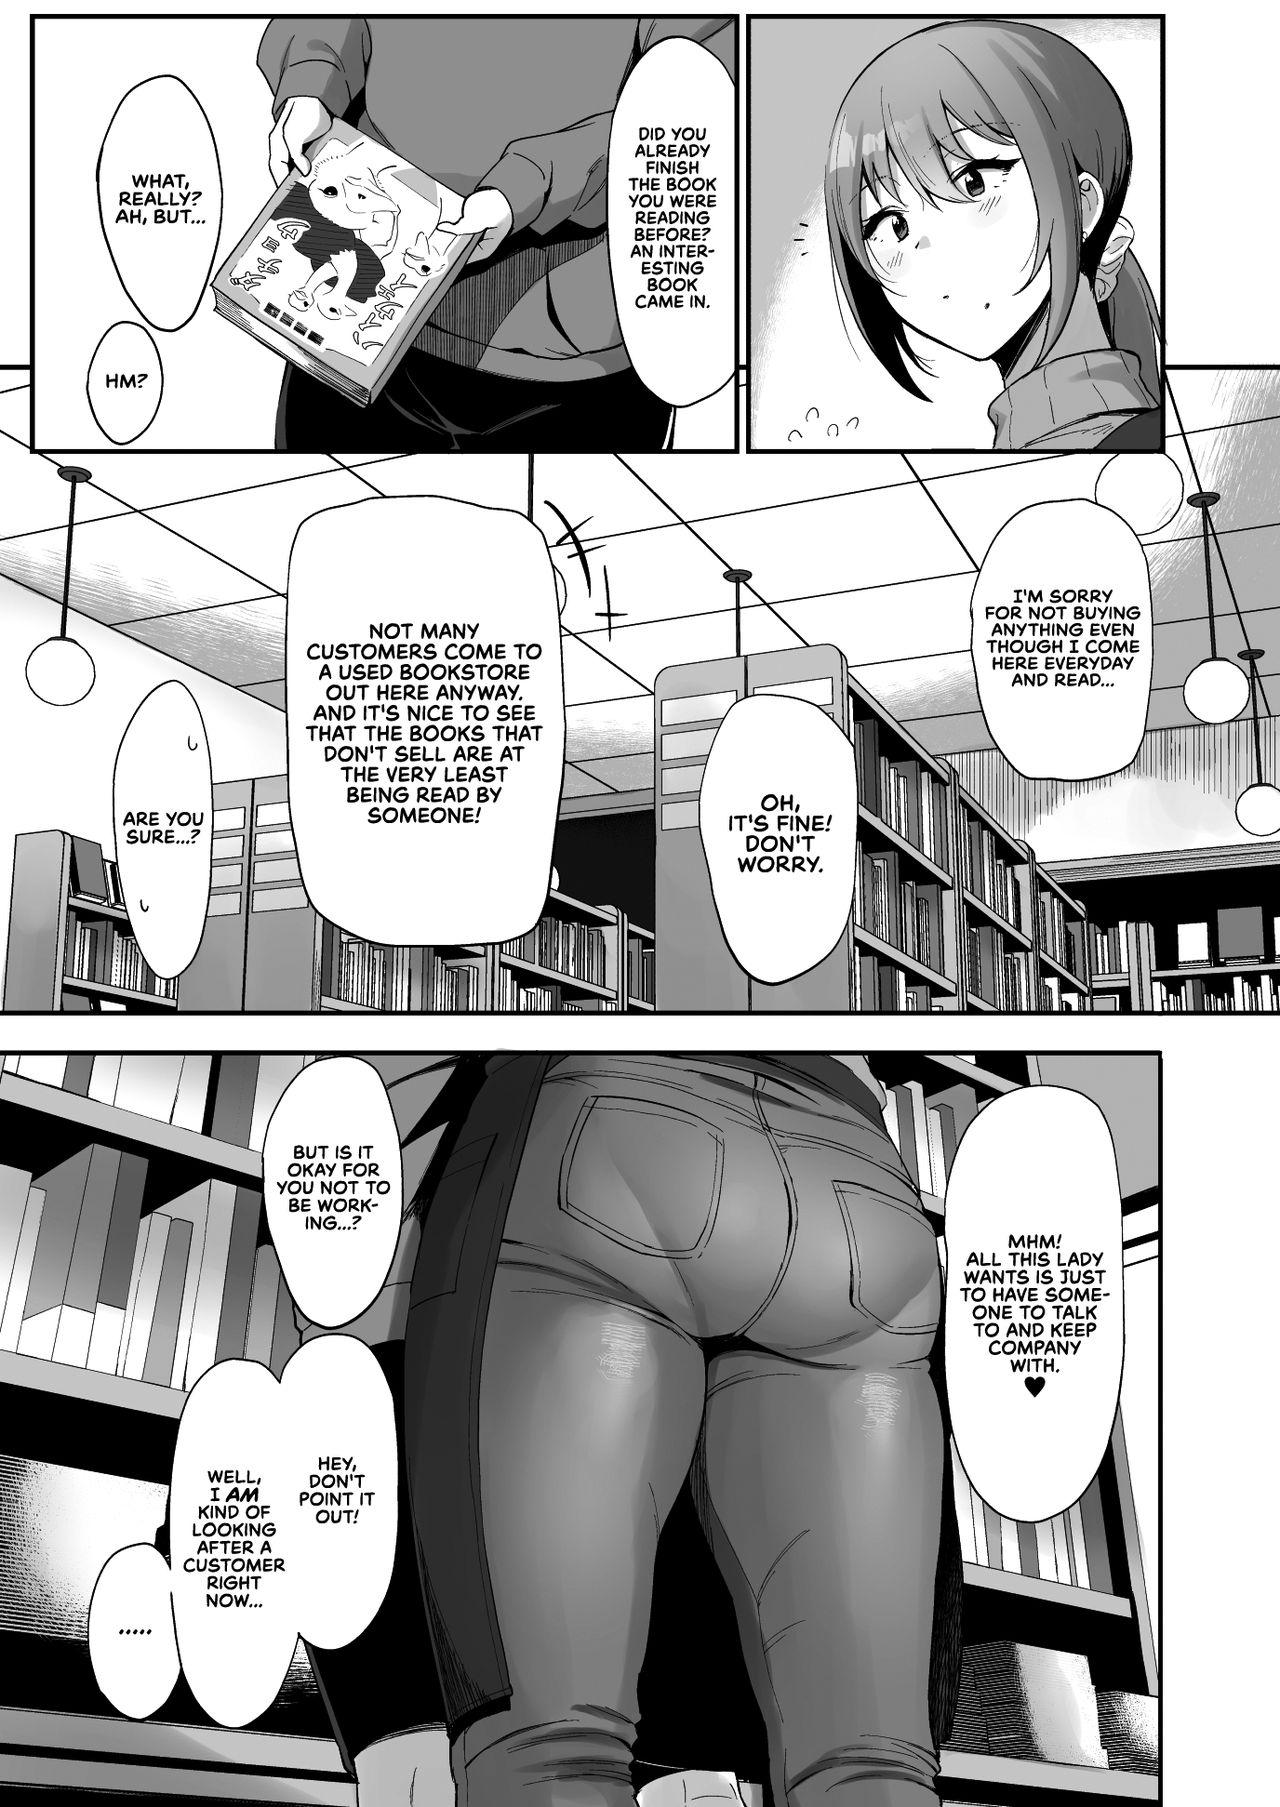 Passivo Furuhonya no Onee-san to | With The Lady From The Used Book Shop - Original Anal Sex - Page 6